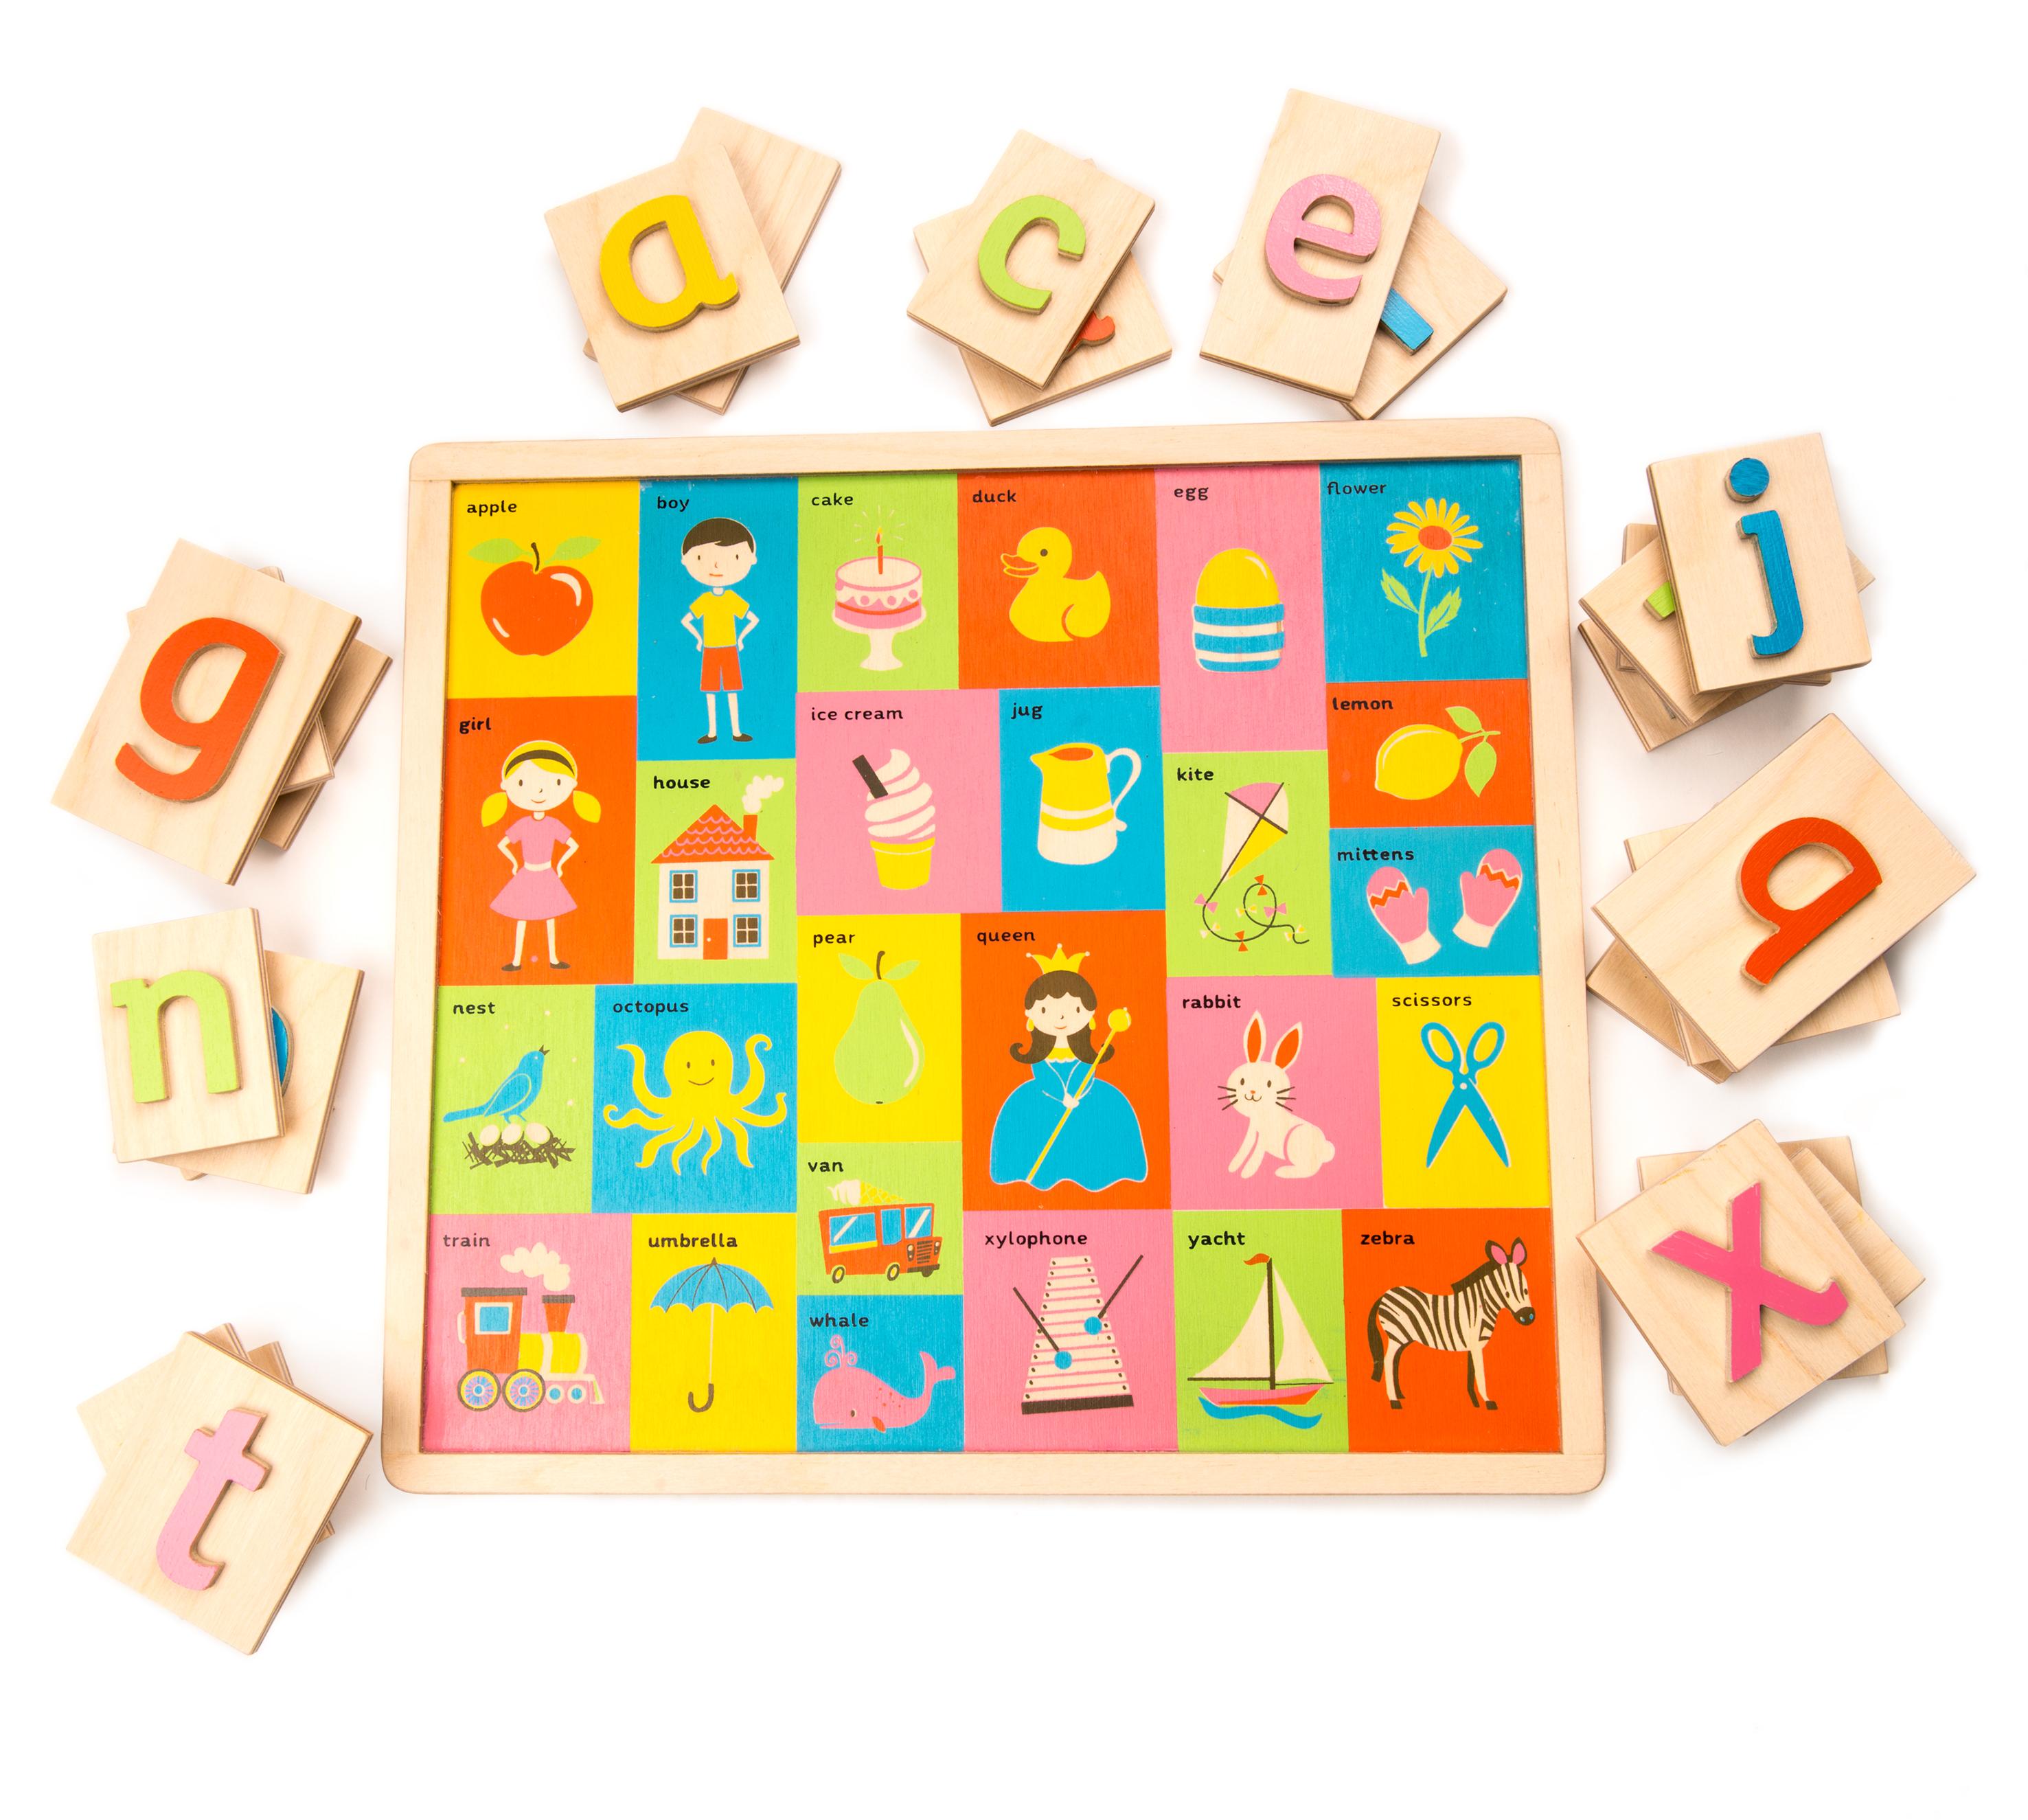 New Wood Alphabet Learning Puzzle with 26 Letters and Images #3